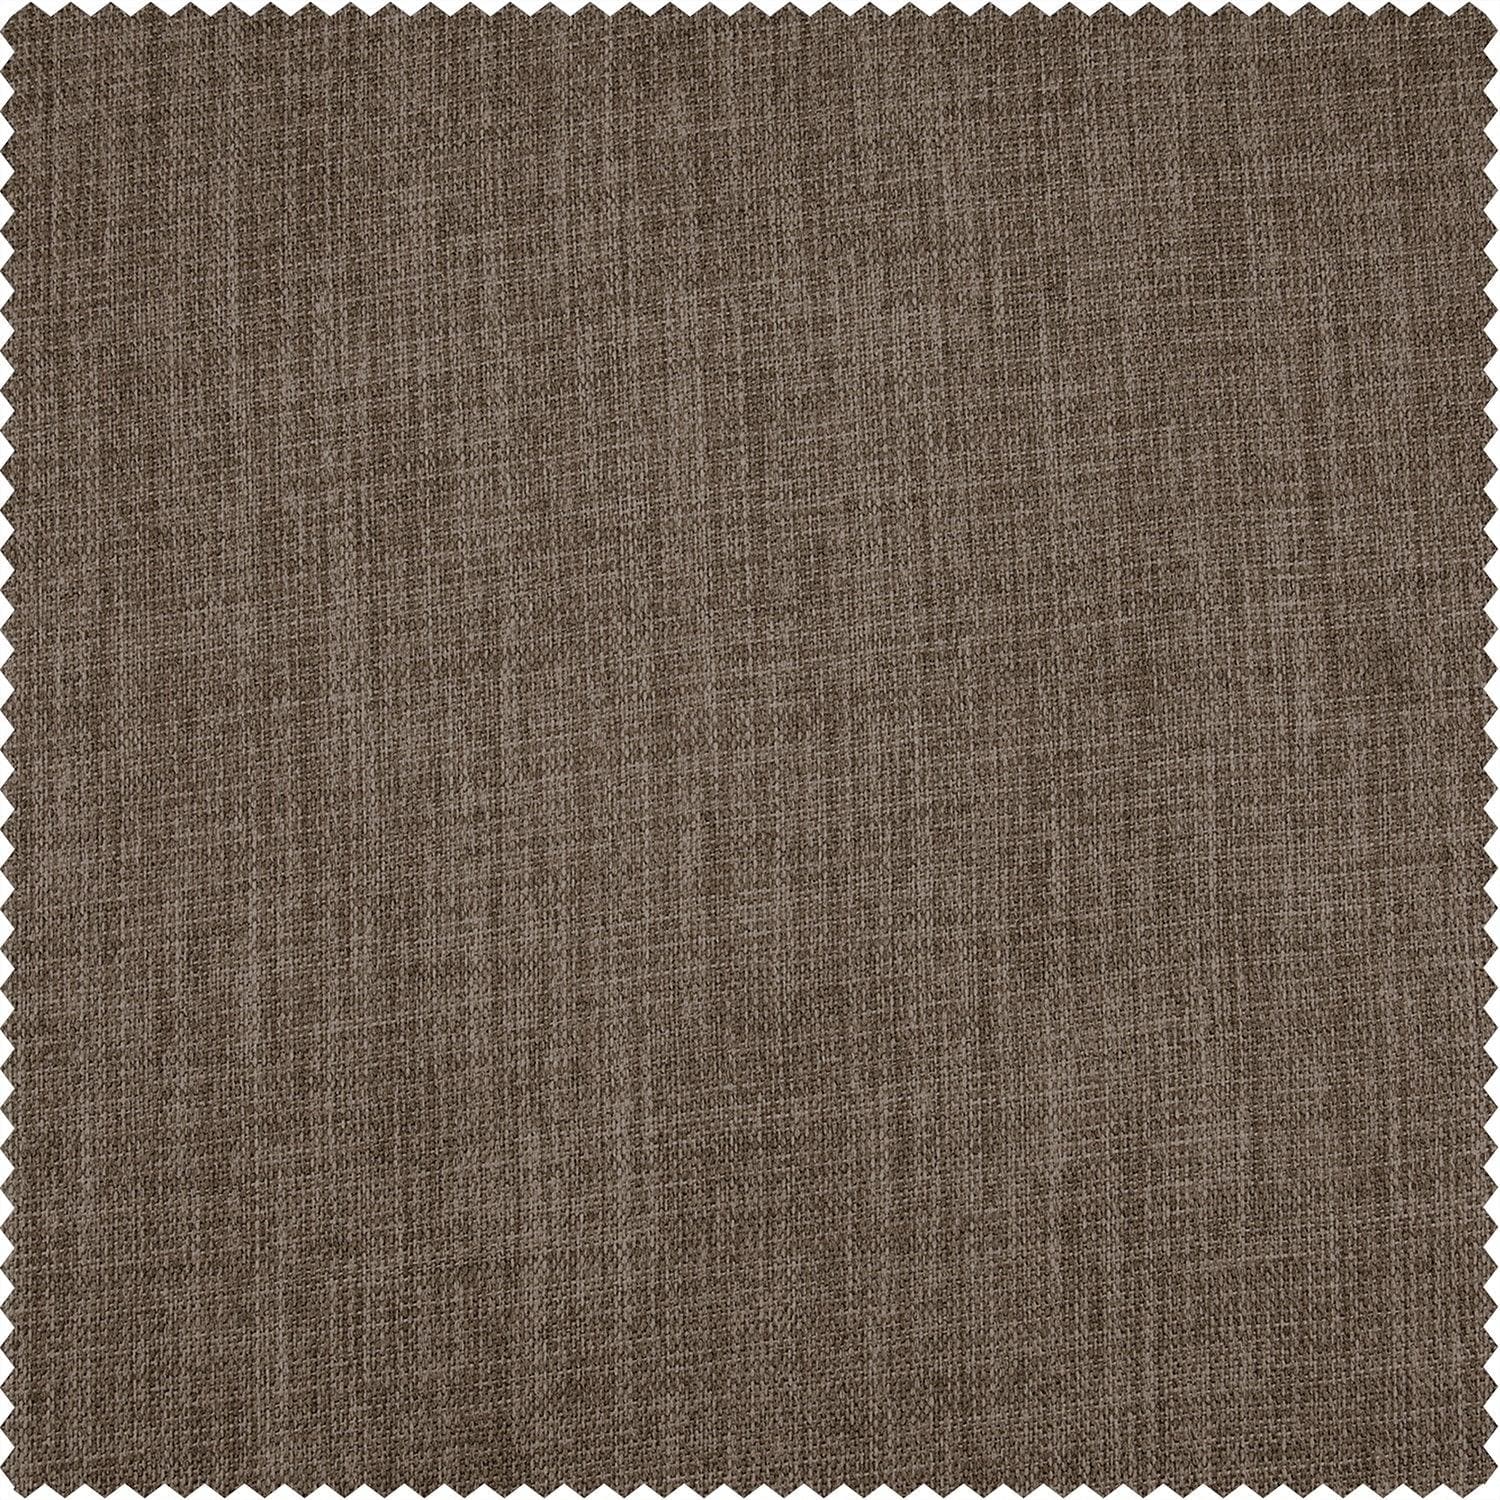 Dutch Cocoa Textured Faux Linen Swatch